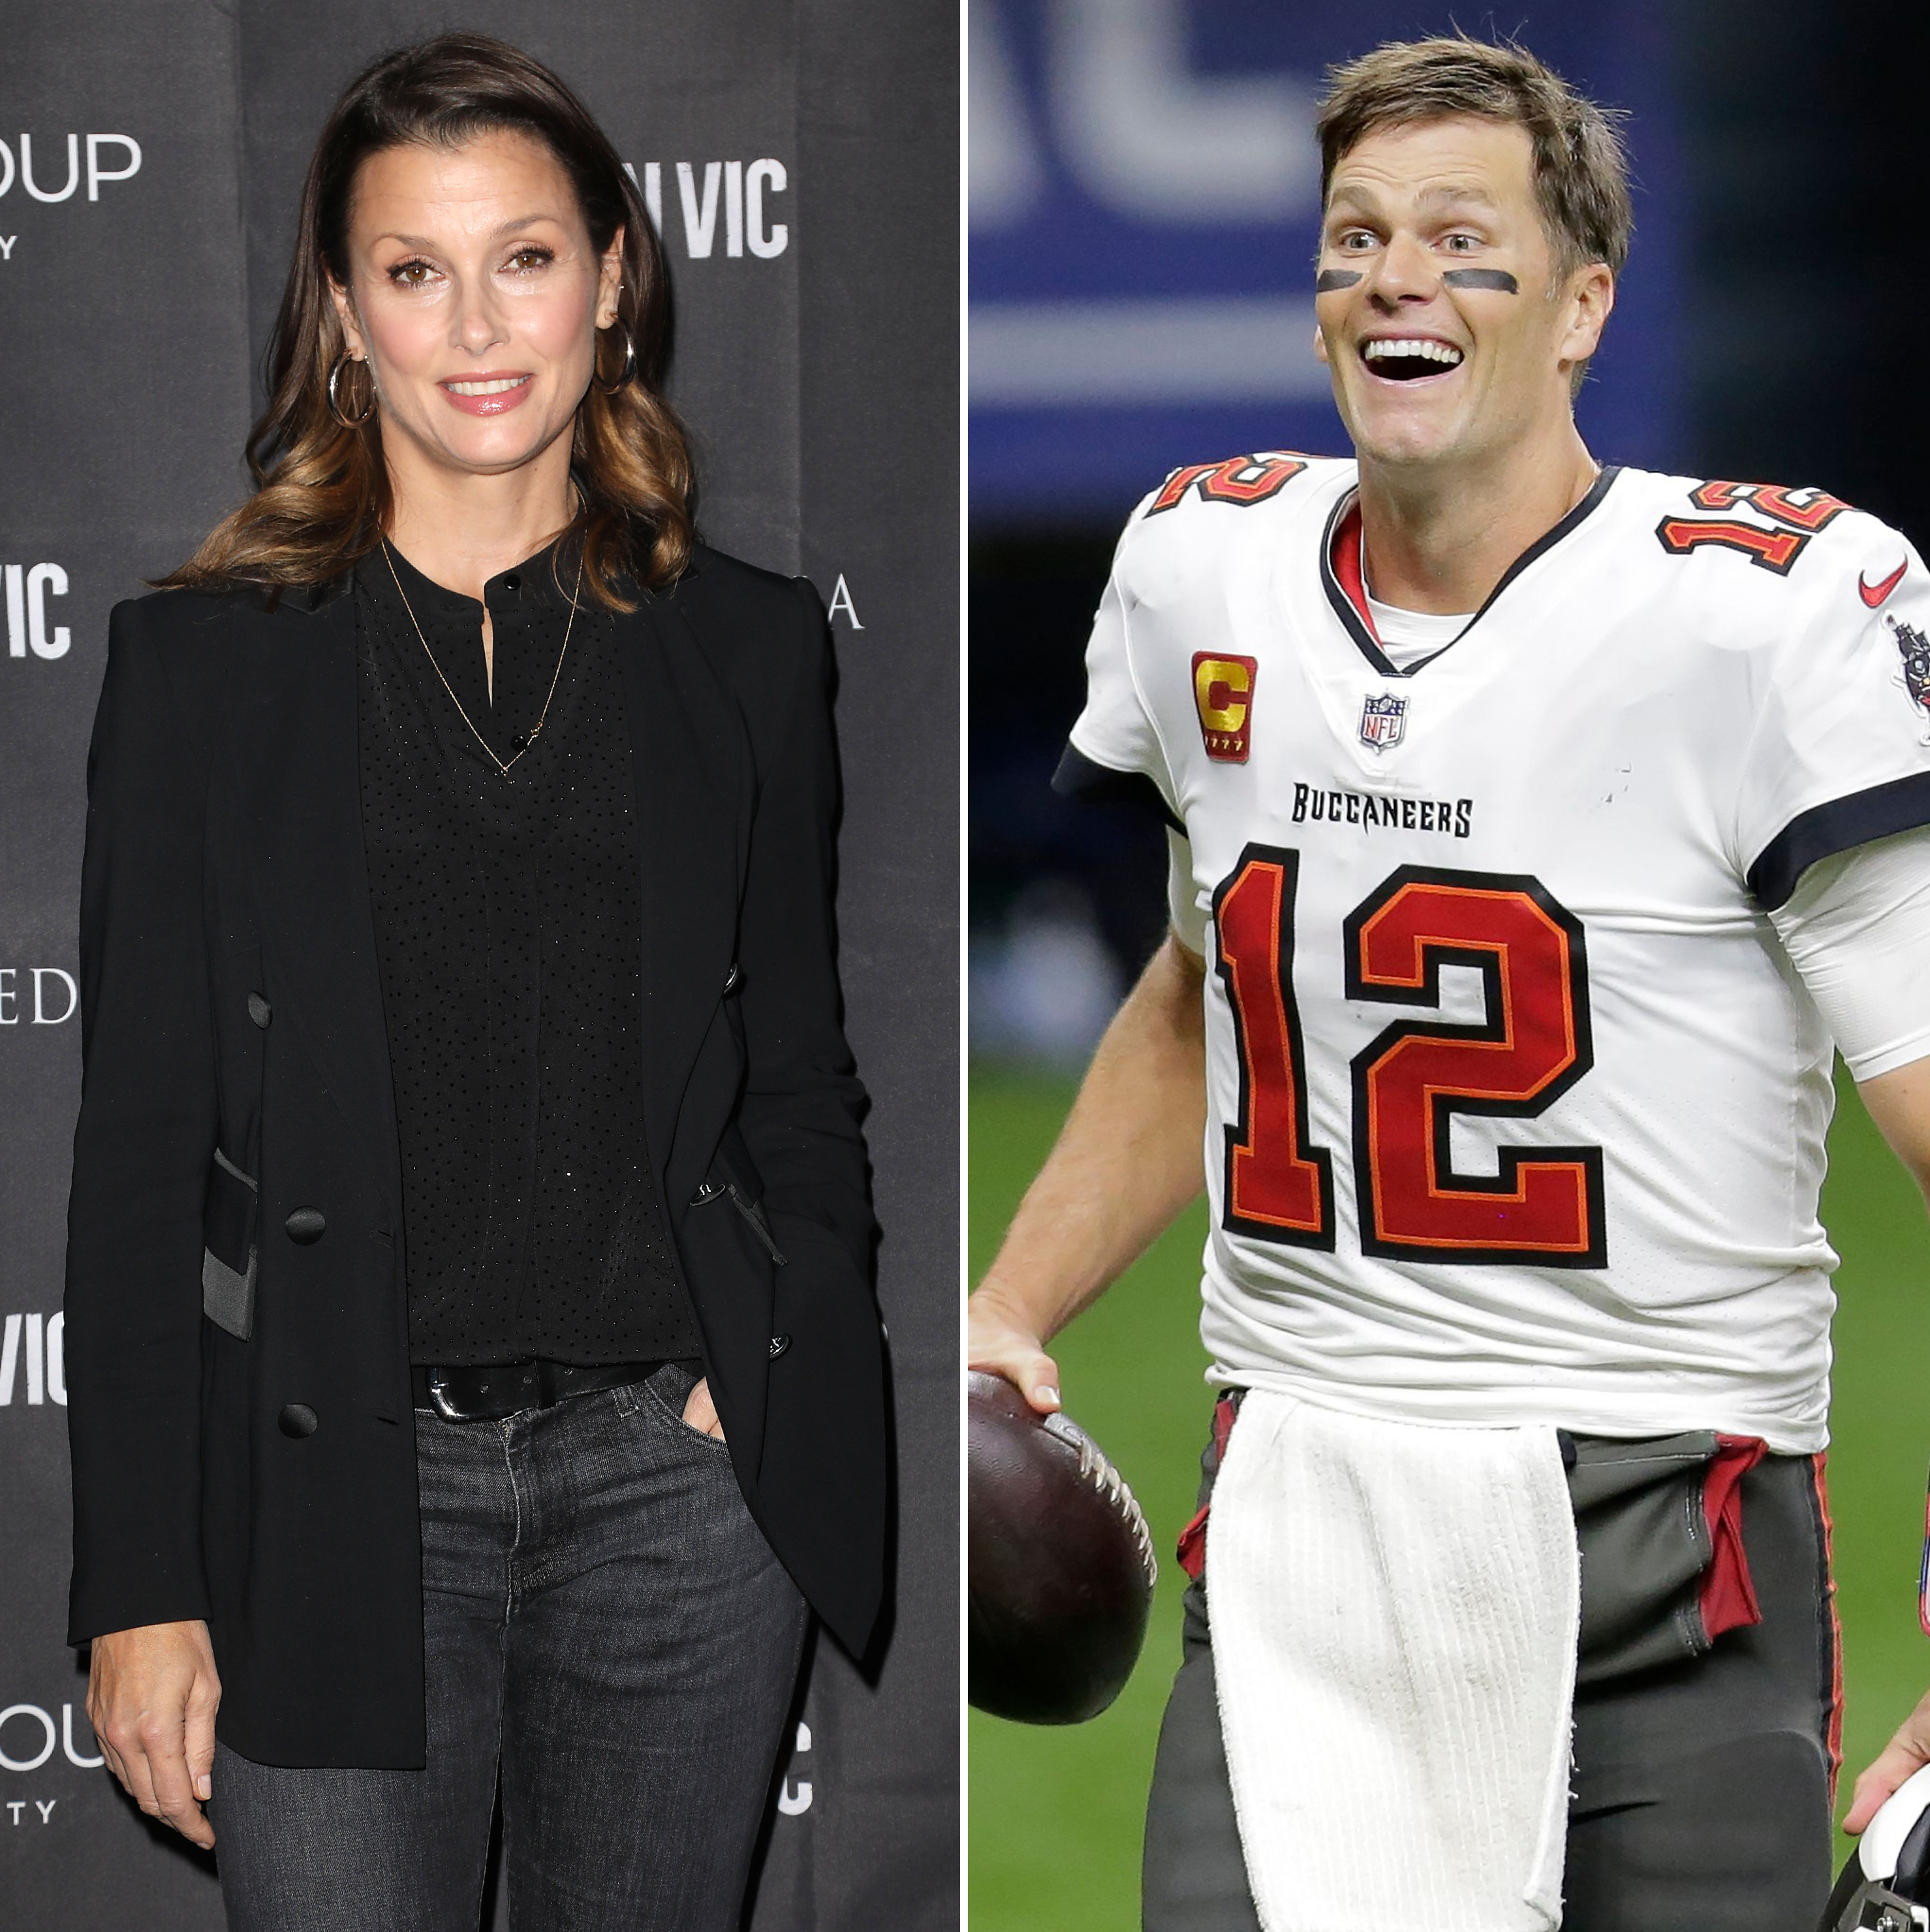 Who is Tom Brady's ex-girlfriend Bridget Moynahan and do they have